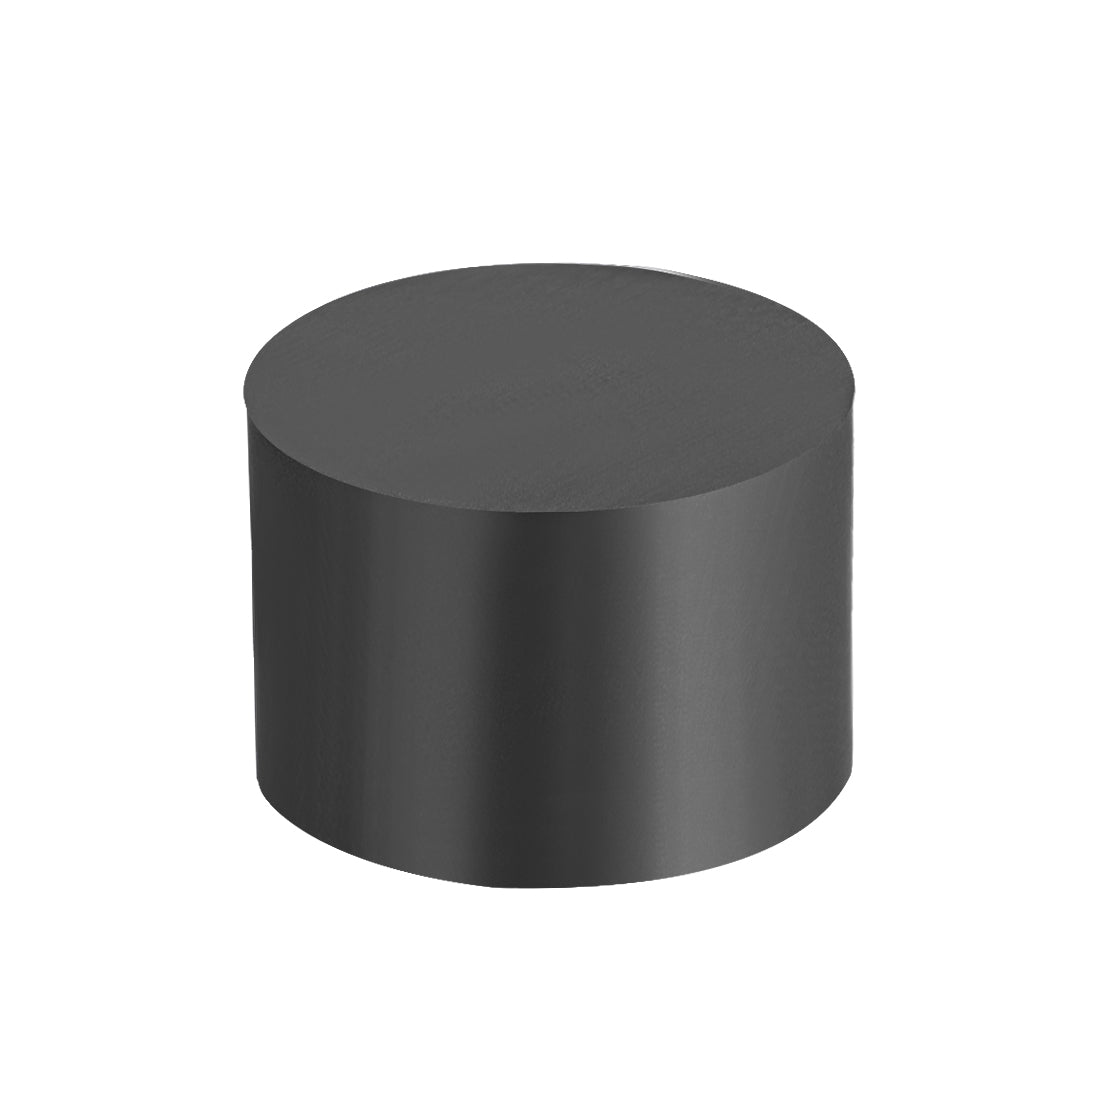 Uxcell Uxcell 20 x 20mm M6 Female Thread Rubber Mounts,Replaces Silentblock Base Block